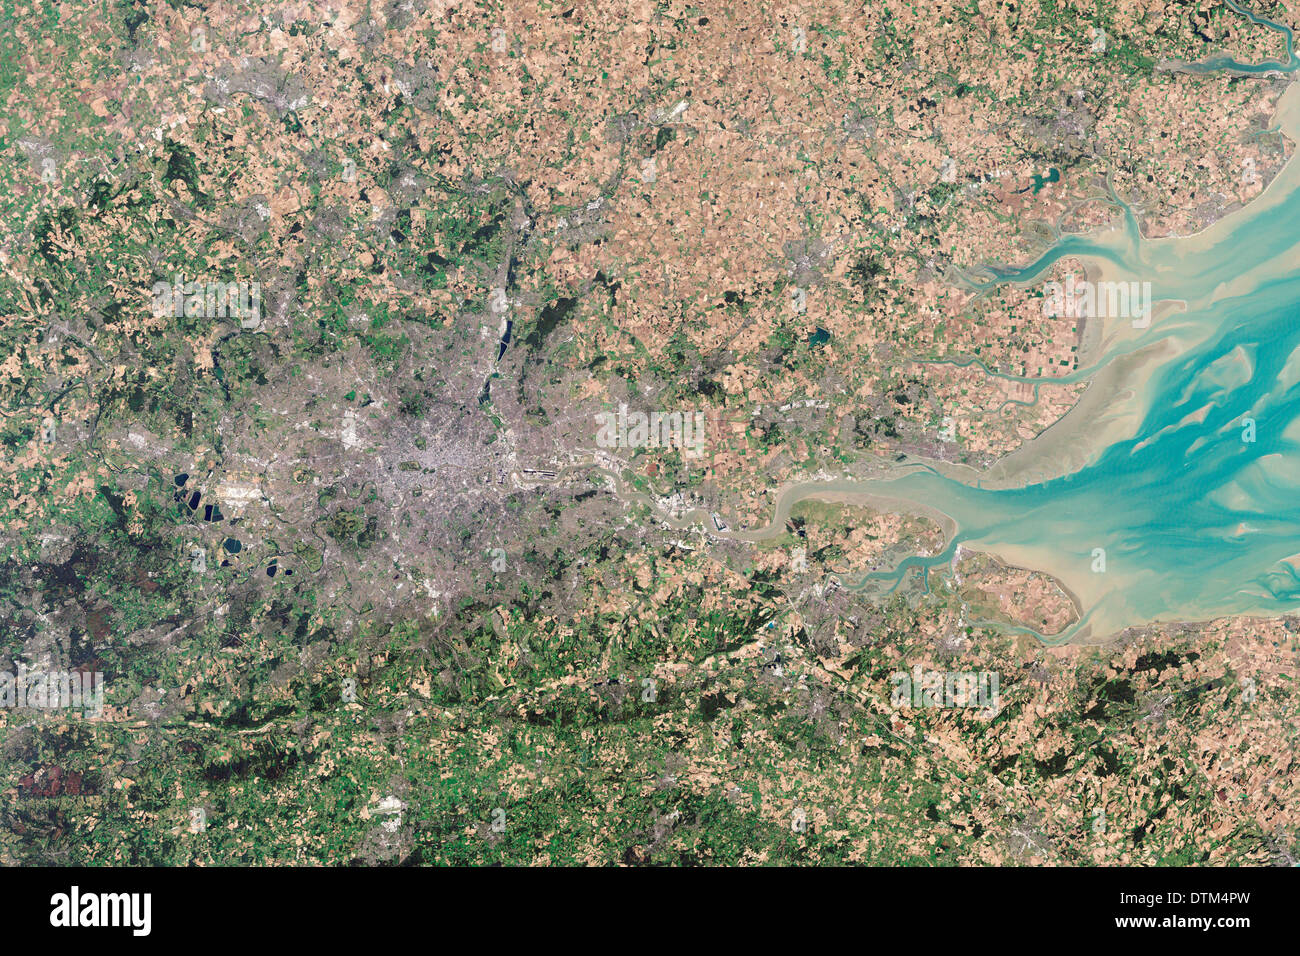 London England as seen from space Stock Photo